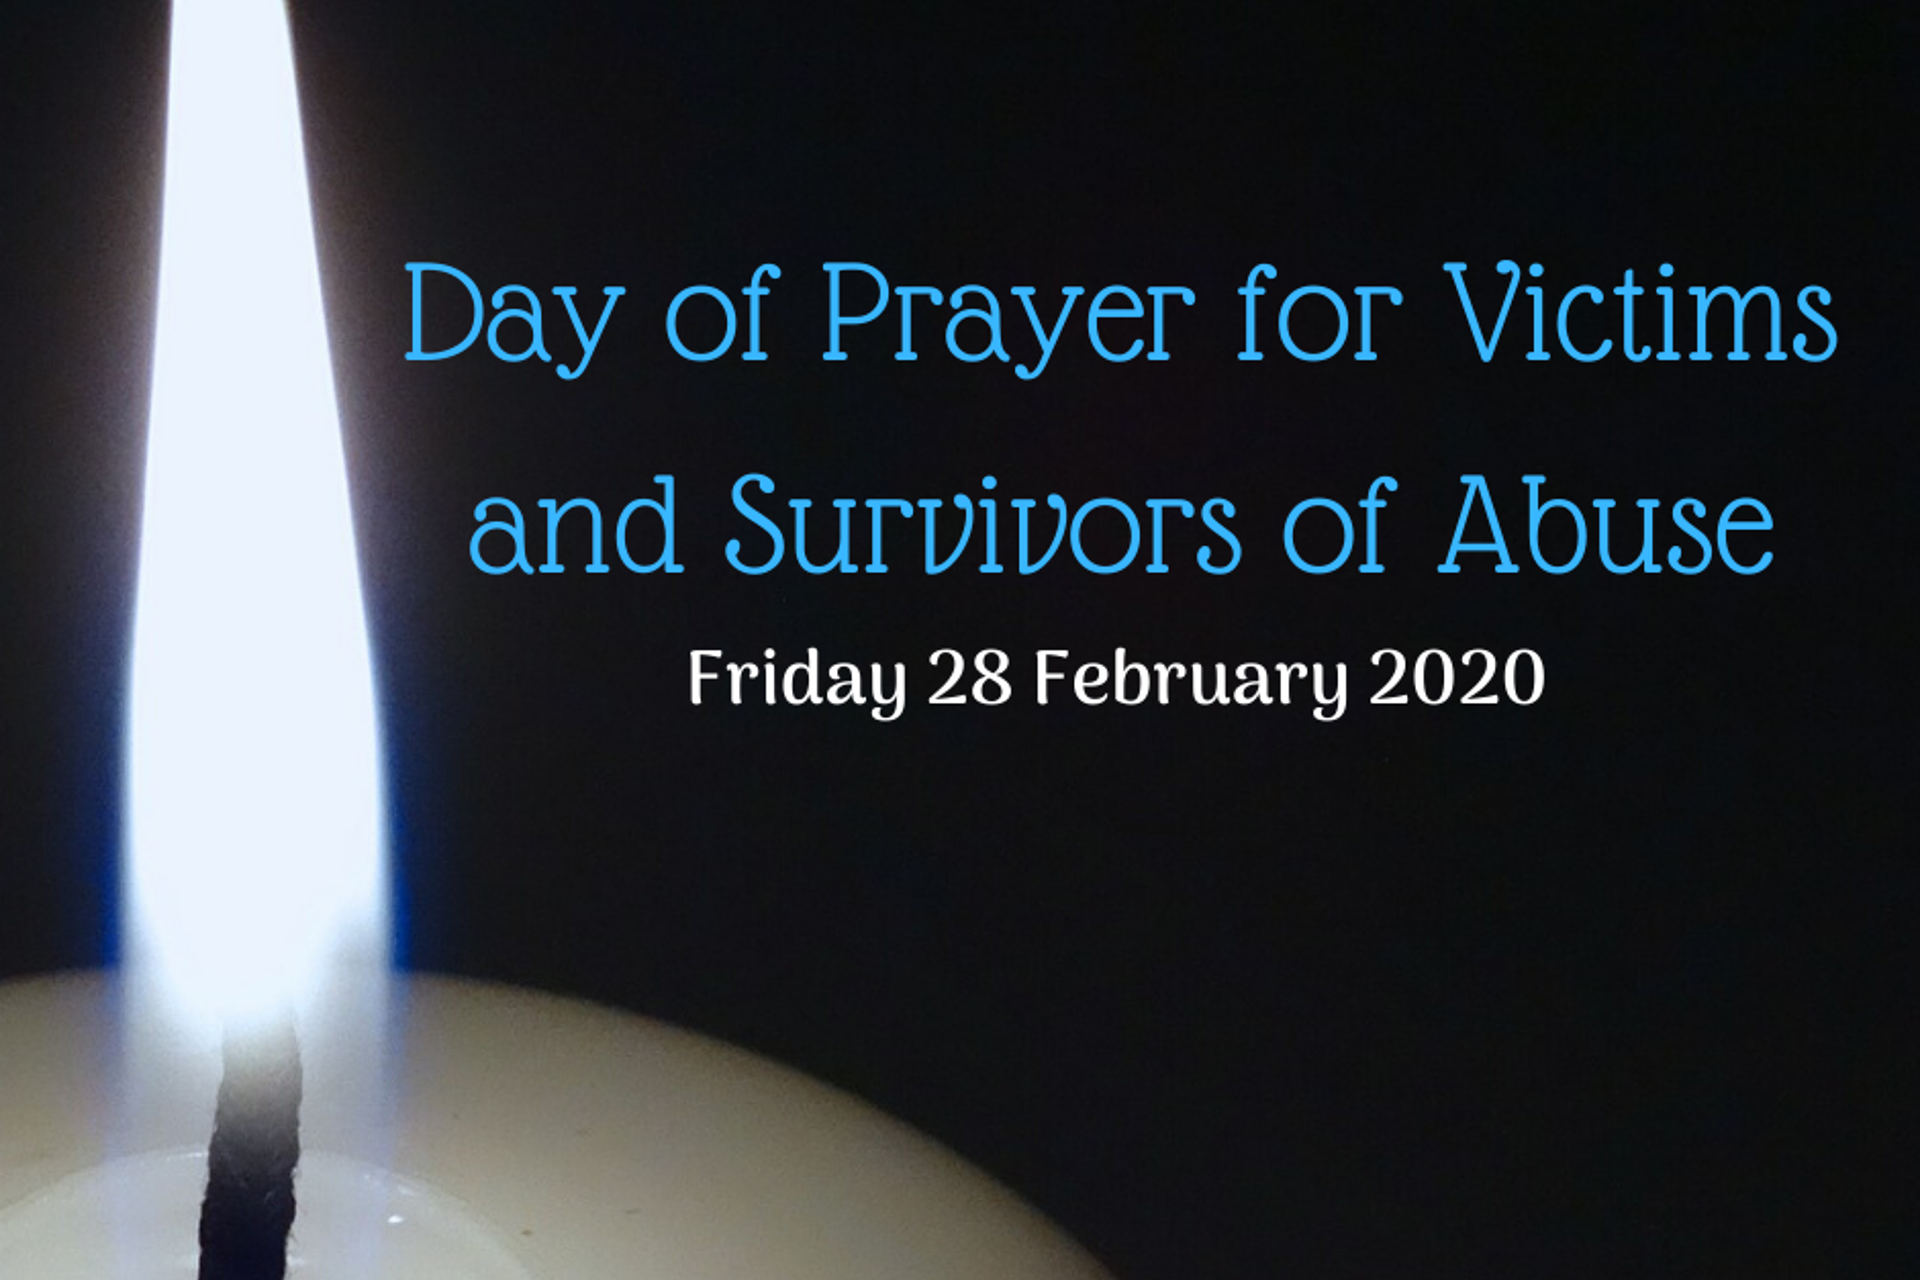 Day of Prayer for Survivors and Victims of Abuse